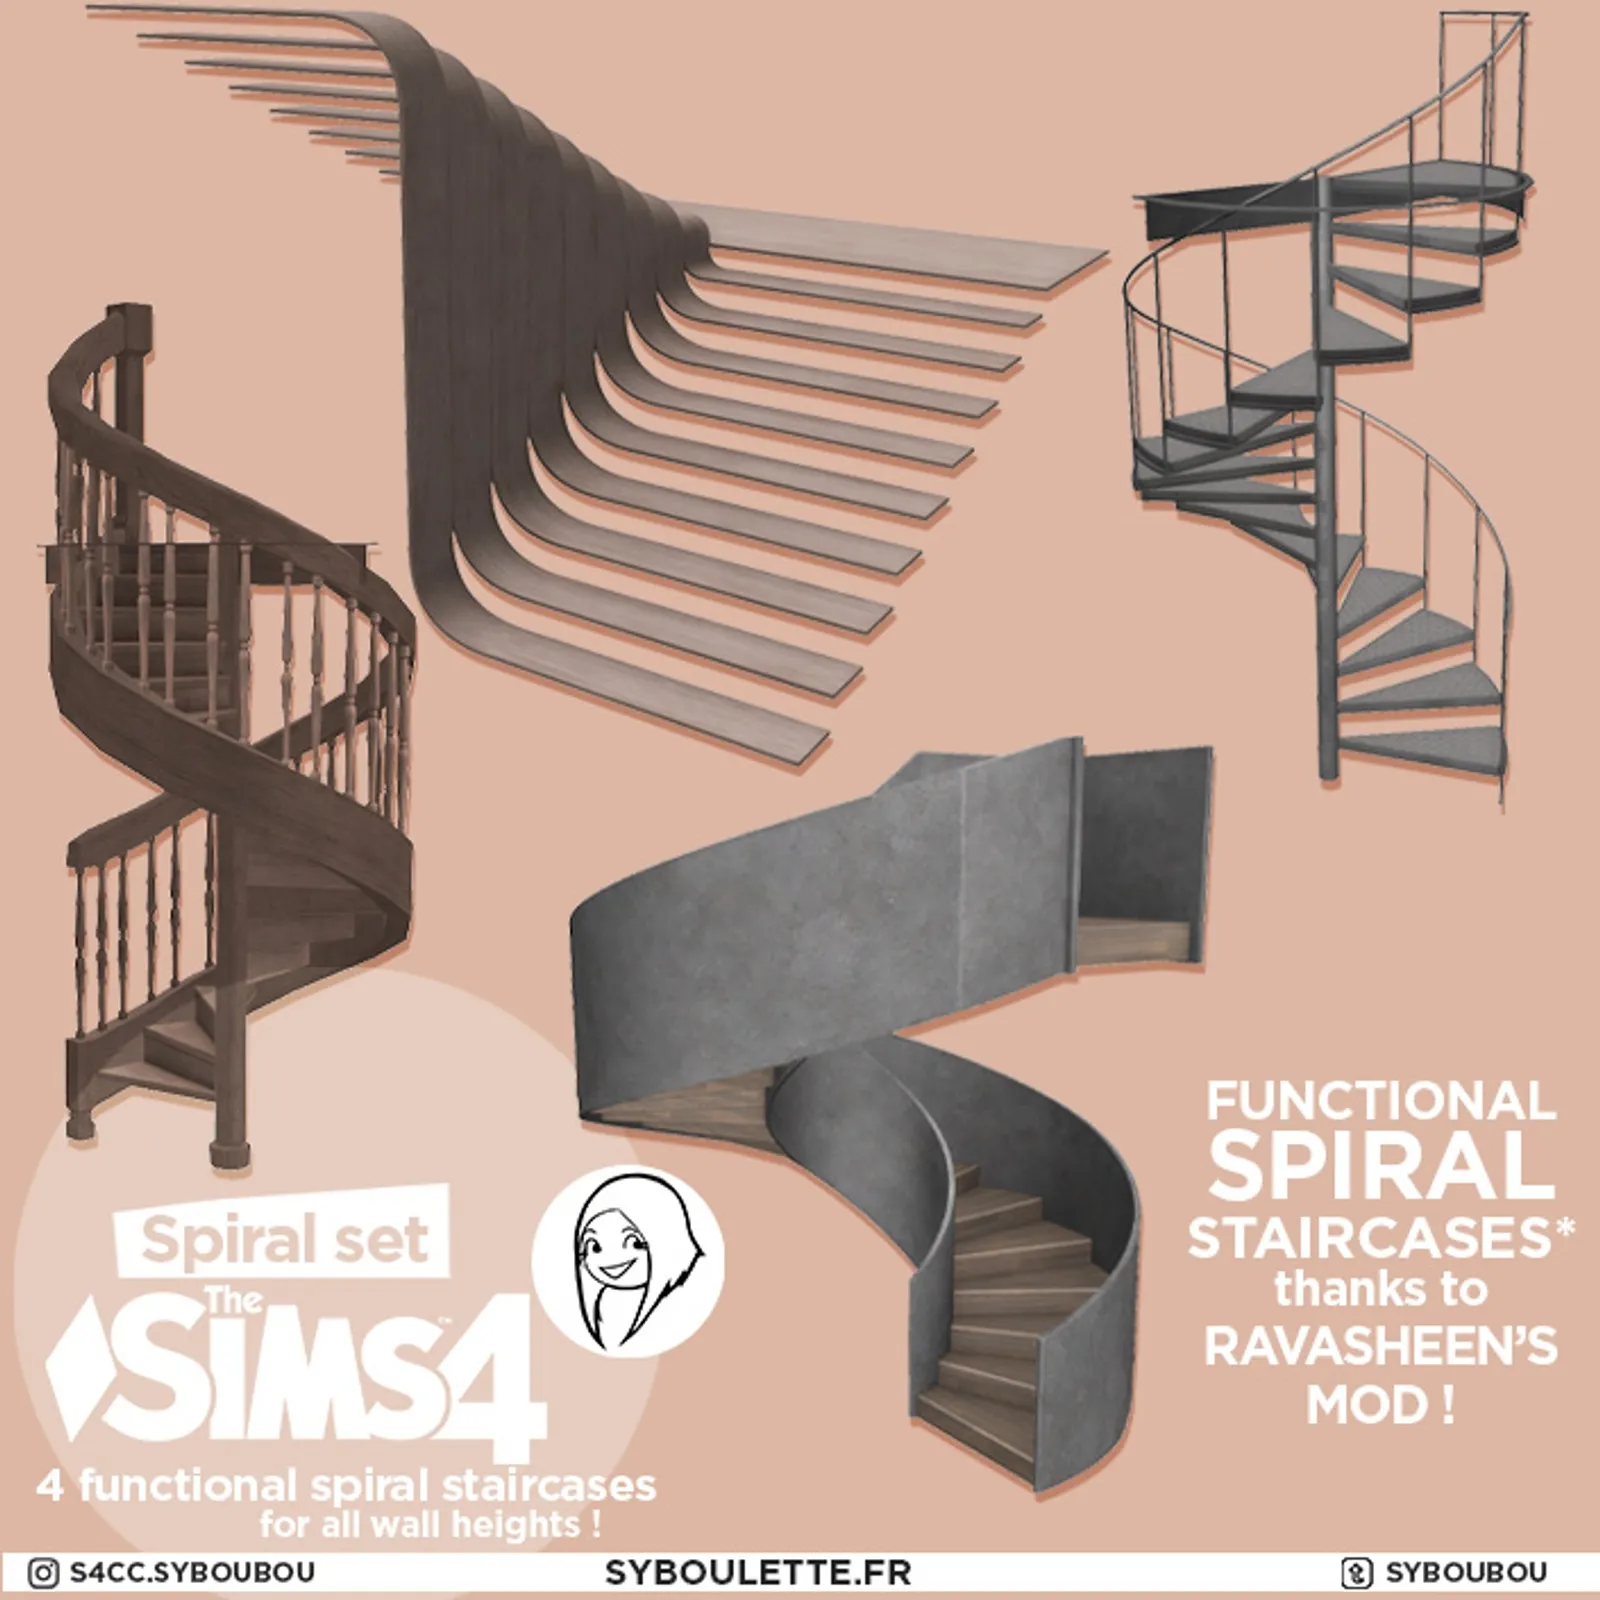 [DOWNLOAD] Spiral staircases set